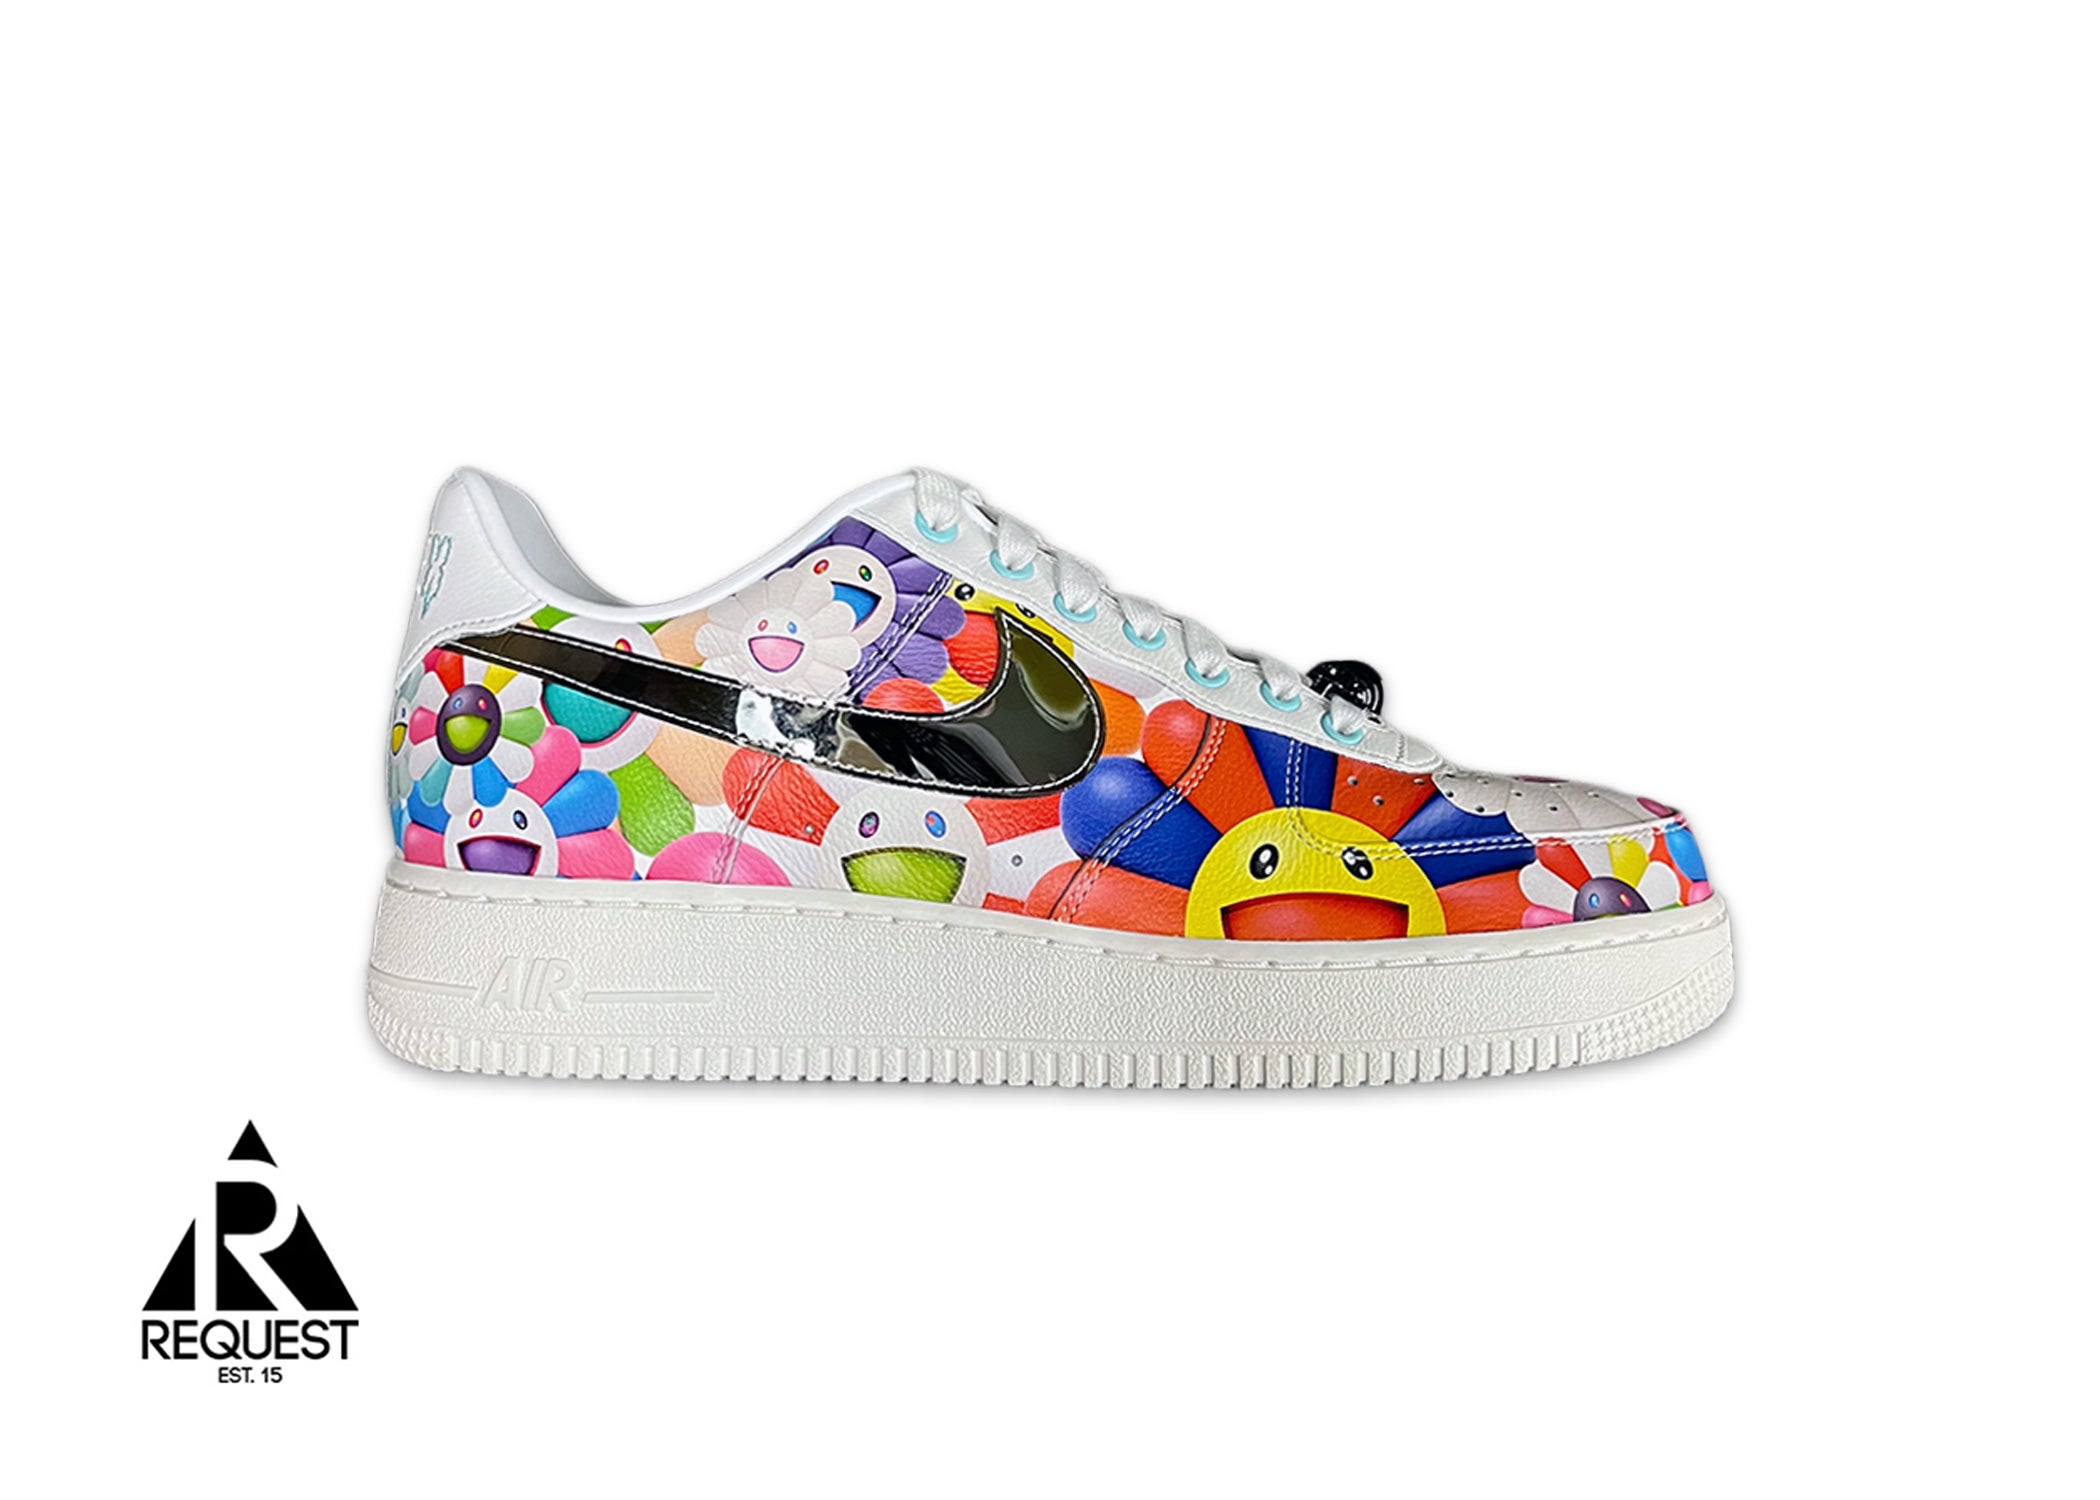 New Arrival… Af1 What The LA Size : 12 Price : 28,875 #RIFMNL For inquiries  , Pls send a dm on our IG Store hrs : 11-6pm Daily